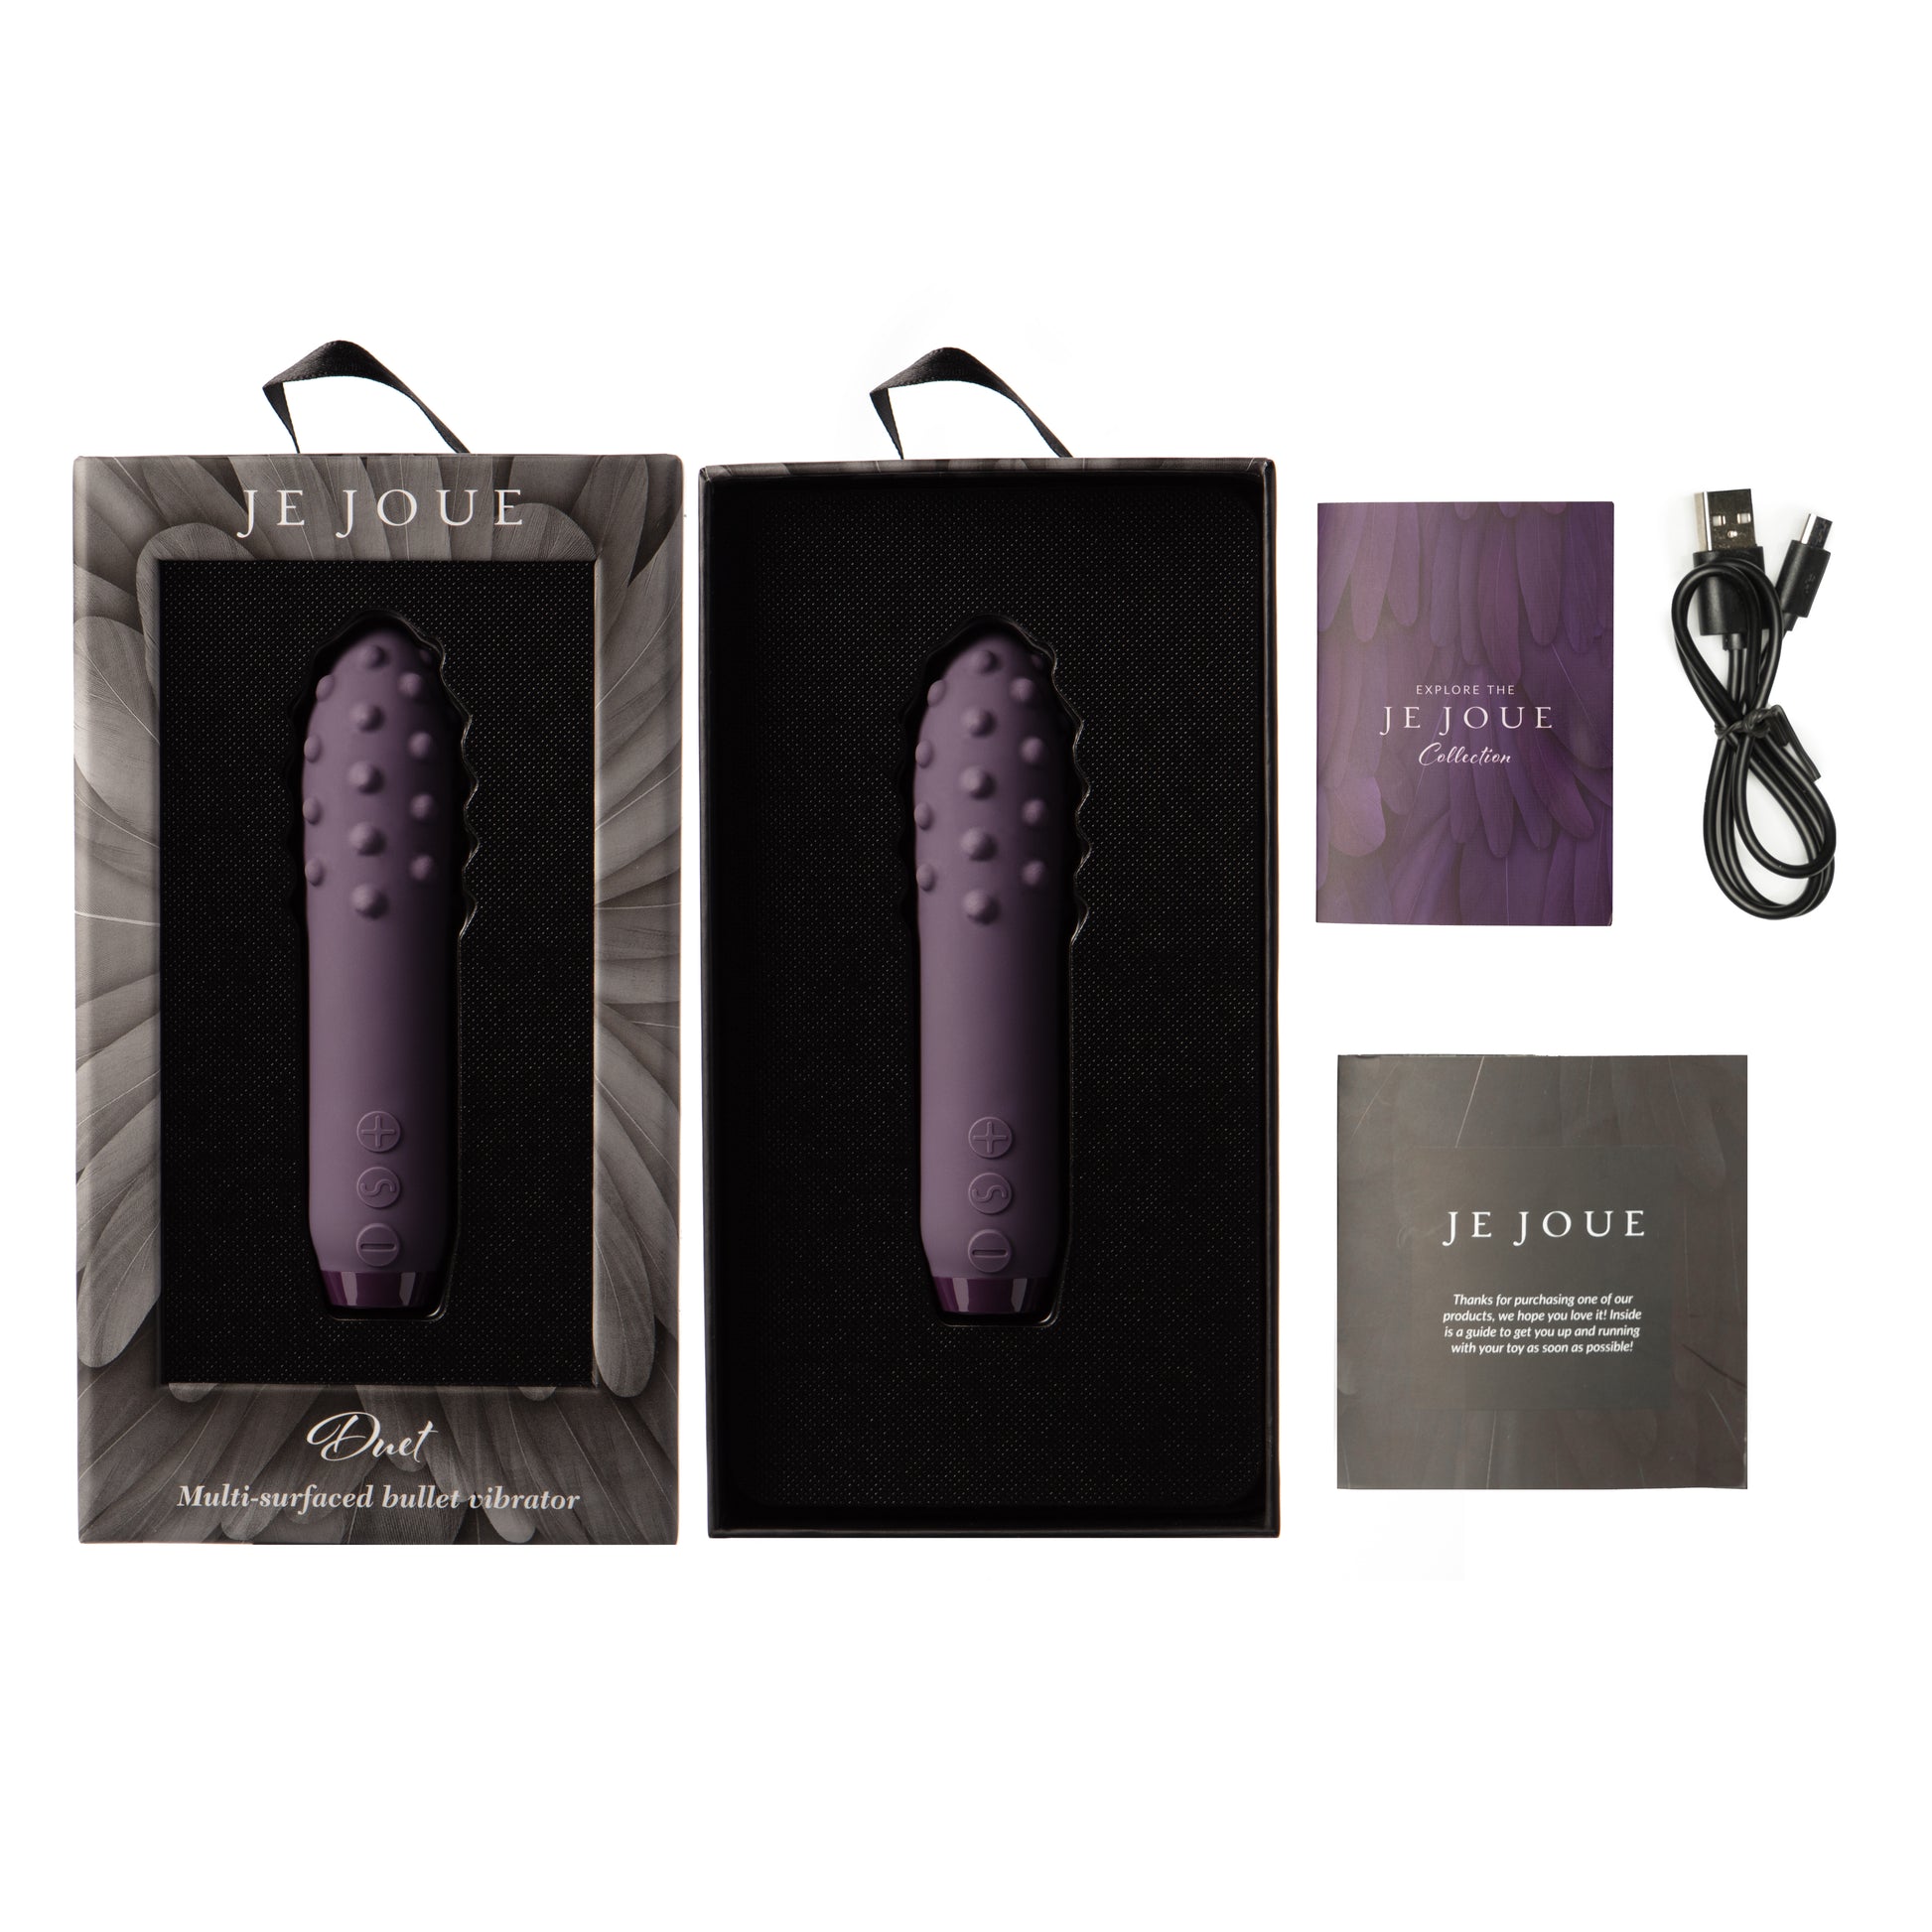 Duet bullet vibrator in box with accessories on side